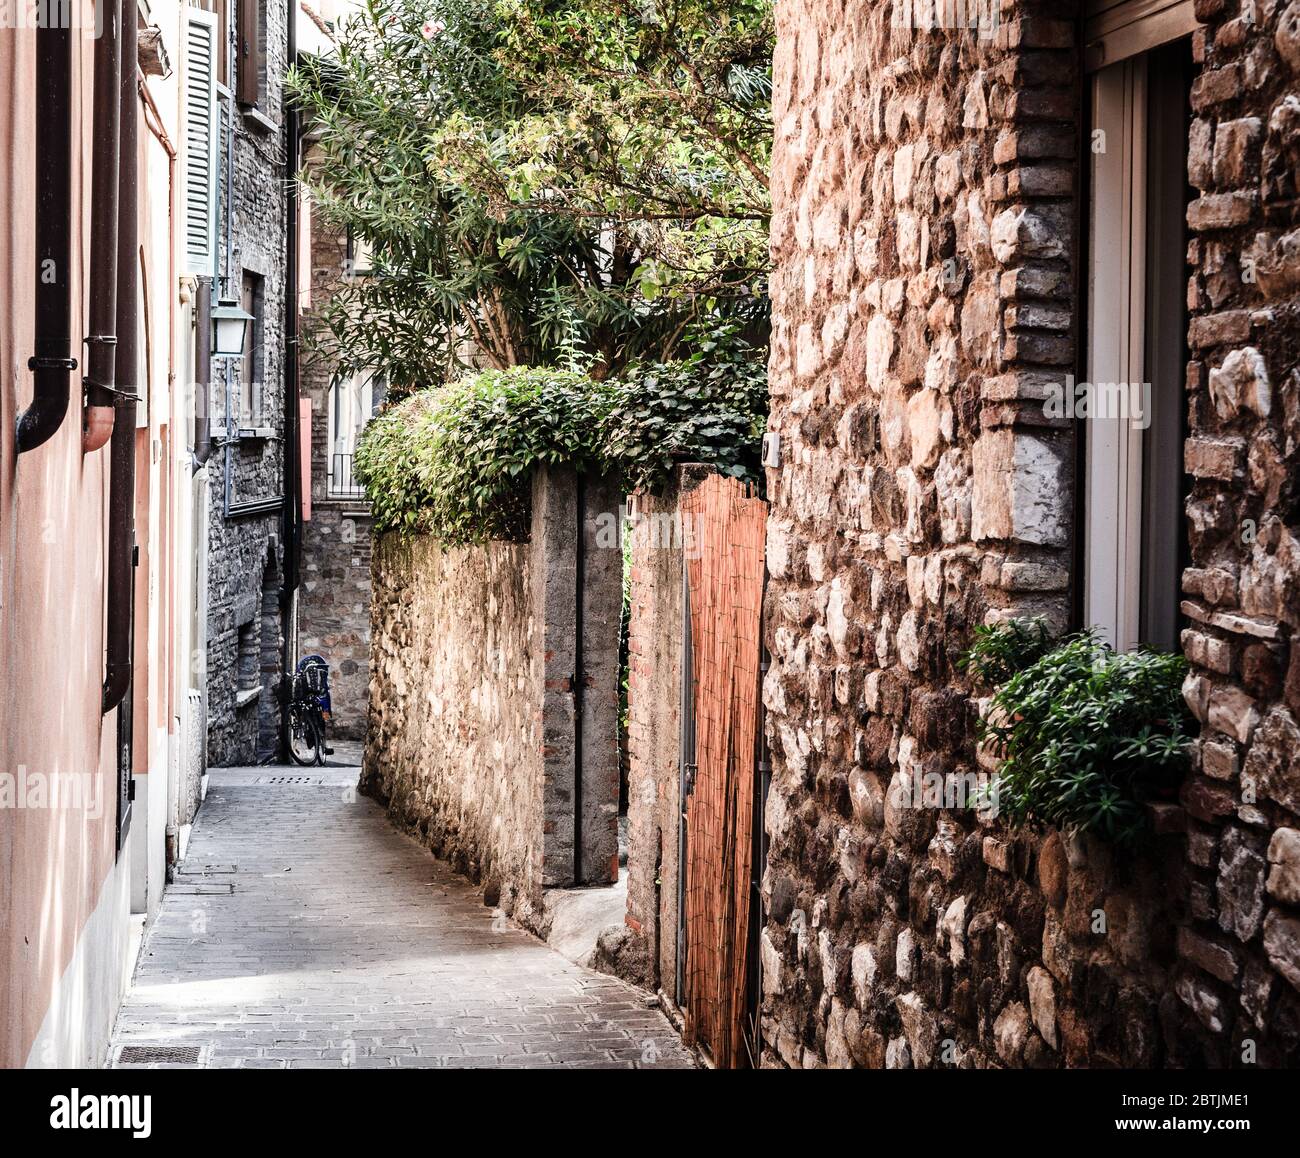 An old residential street in the town of Sirmione in Lombardy, Italy Stock Photo